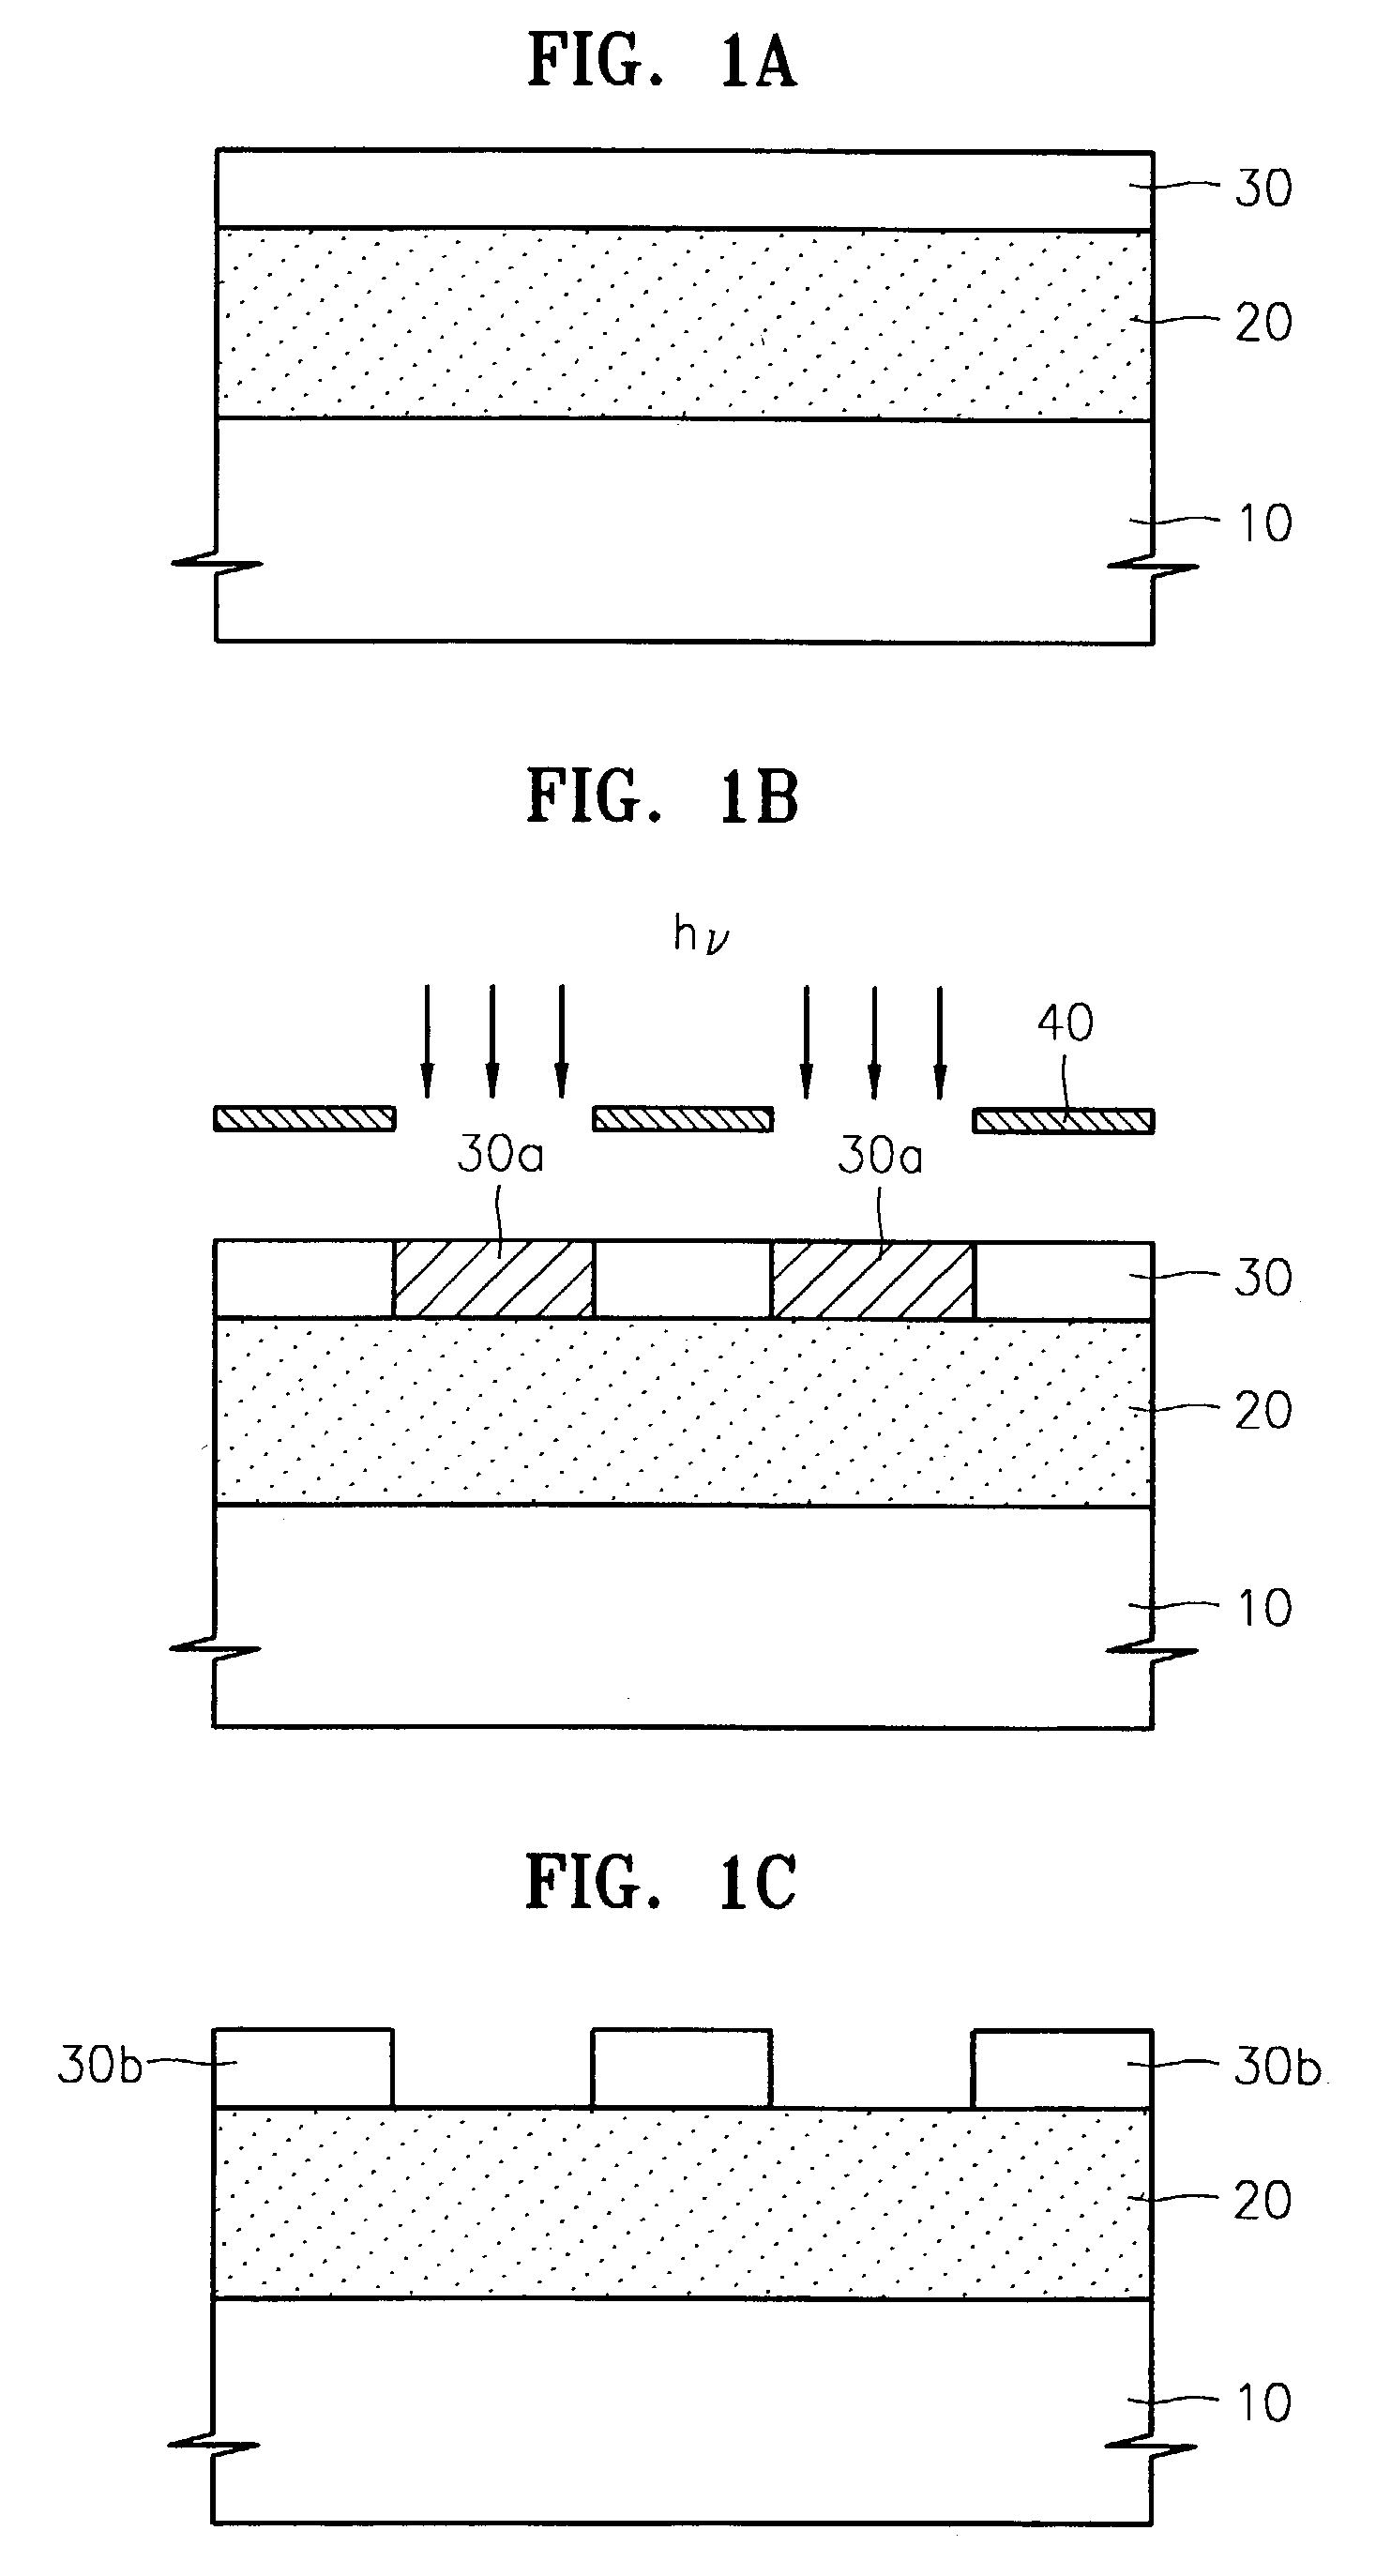 Method of forming a photoresist pattern and method for patterning a layer using a photoresist